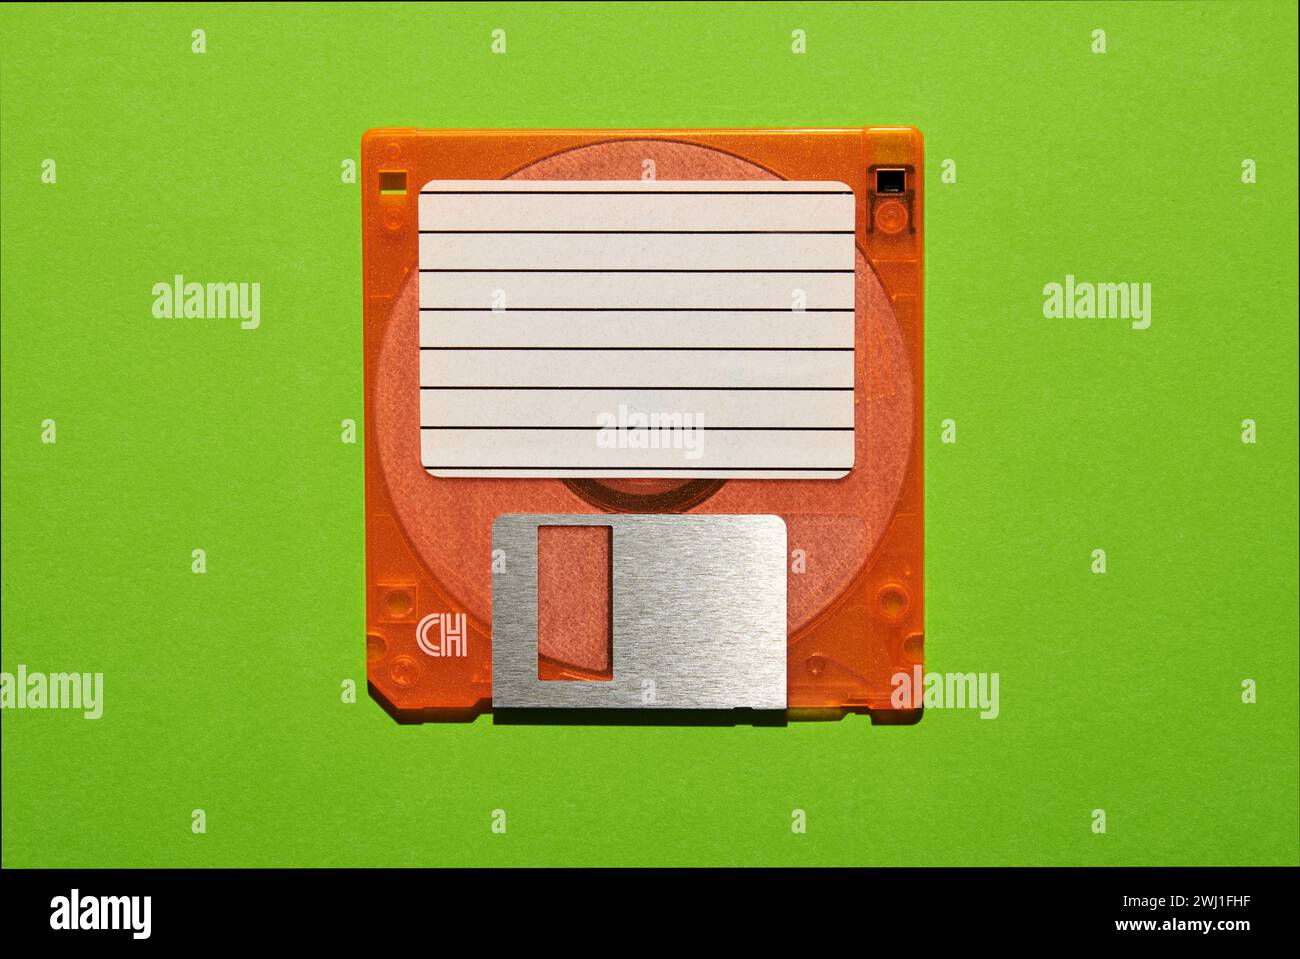 Top view of blank paper with lines stuck on brown floppy disk on green background Stock Photo